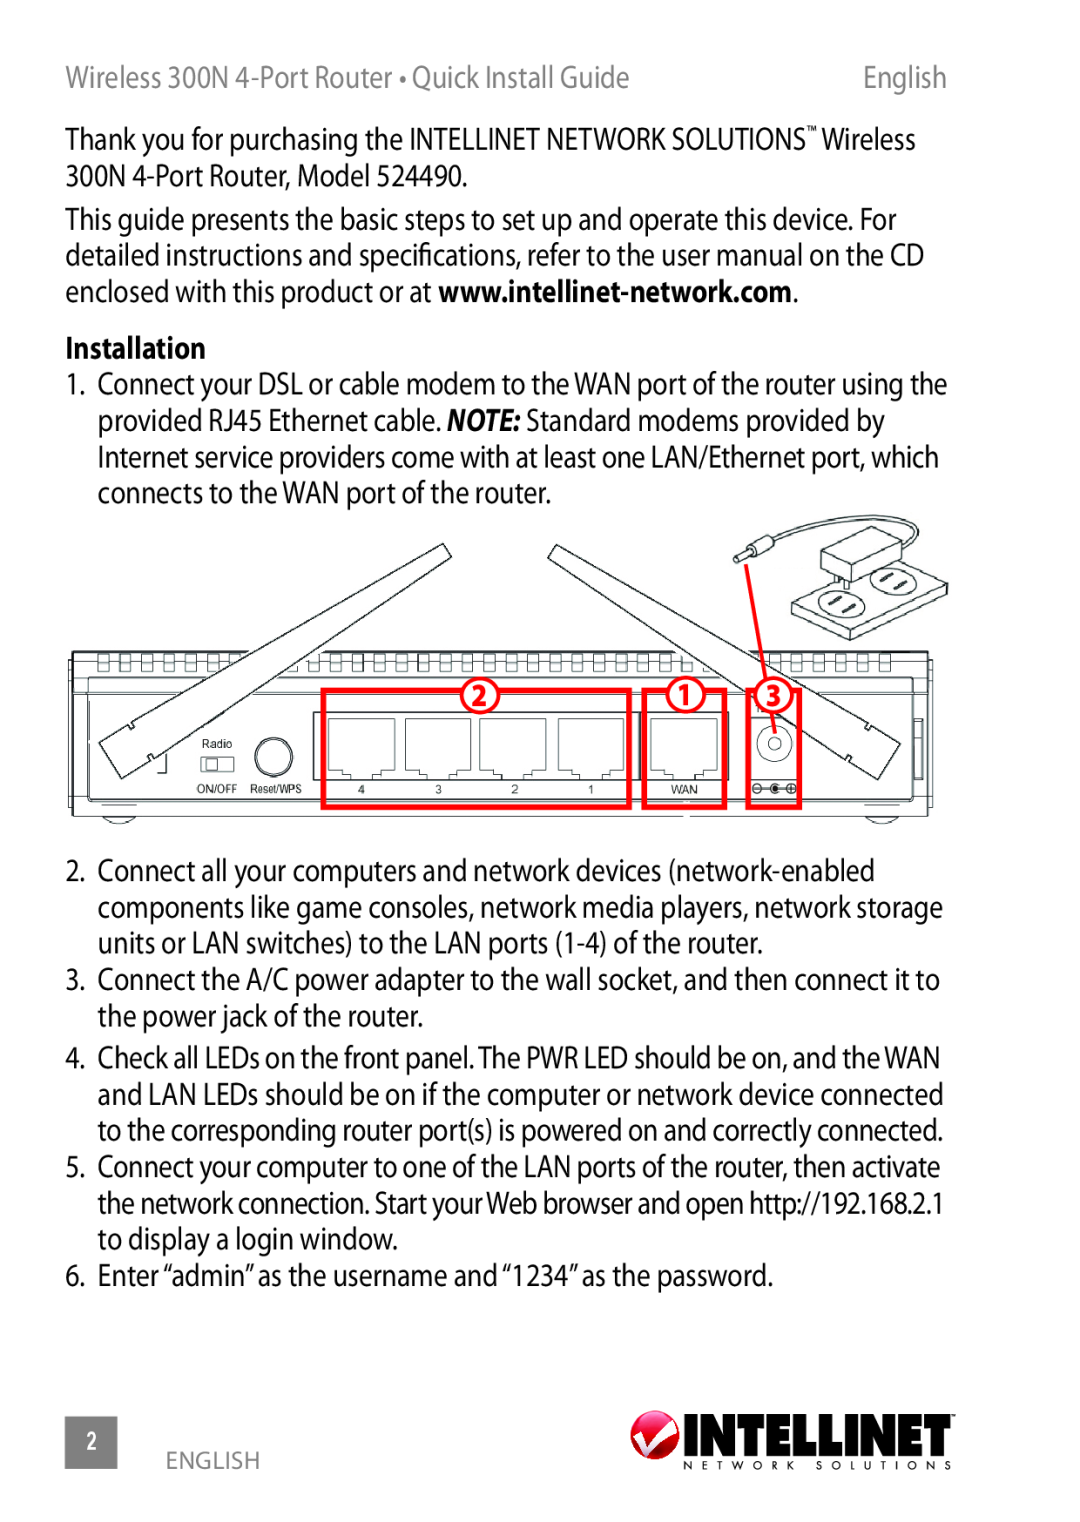 Intellinet Network Solutions Model 524490 manual Wireless 300N 4-Port Router Quick Install Guide, Installation 